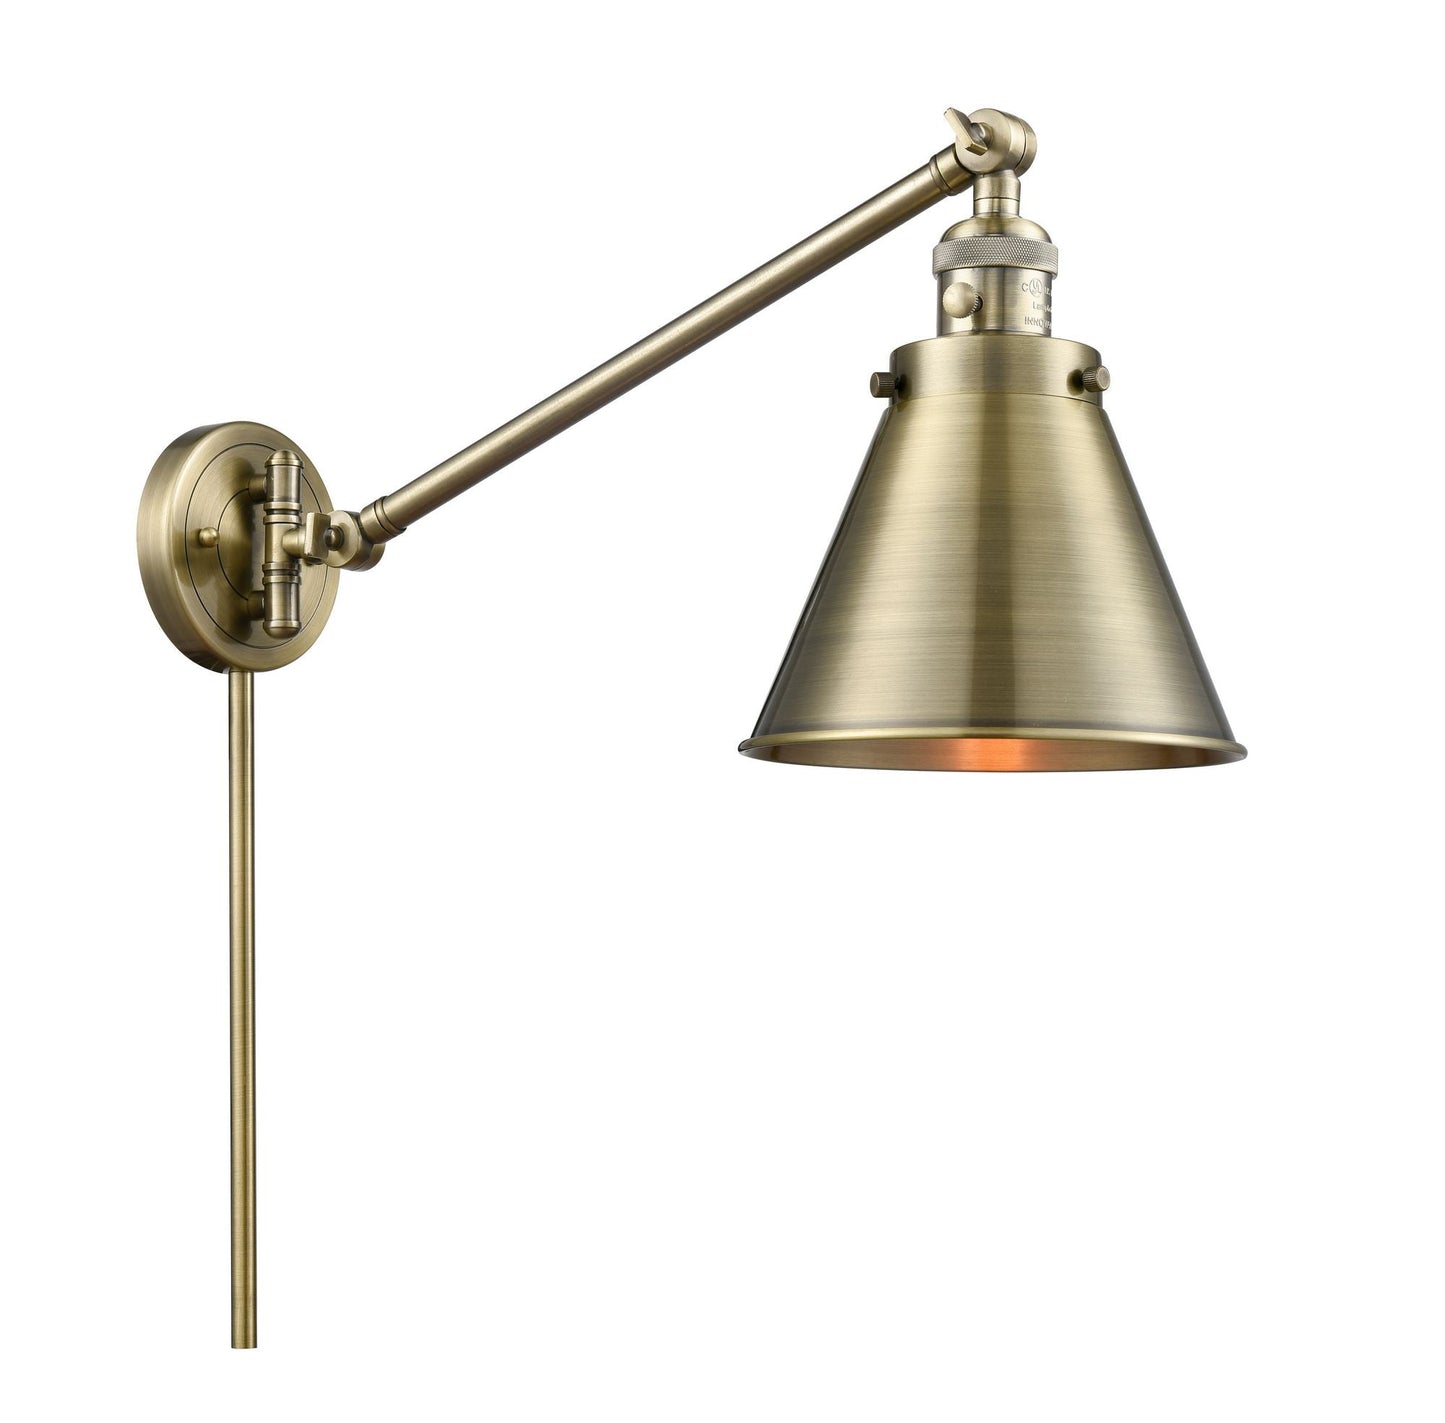 1-Light 8" Antique Brass Appalachian Swing Arm With Switch - Cone Antique Brass Glass - Incandesent Or LED Bulbs